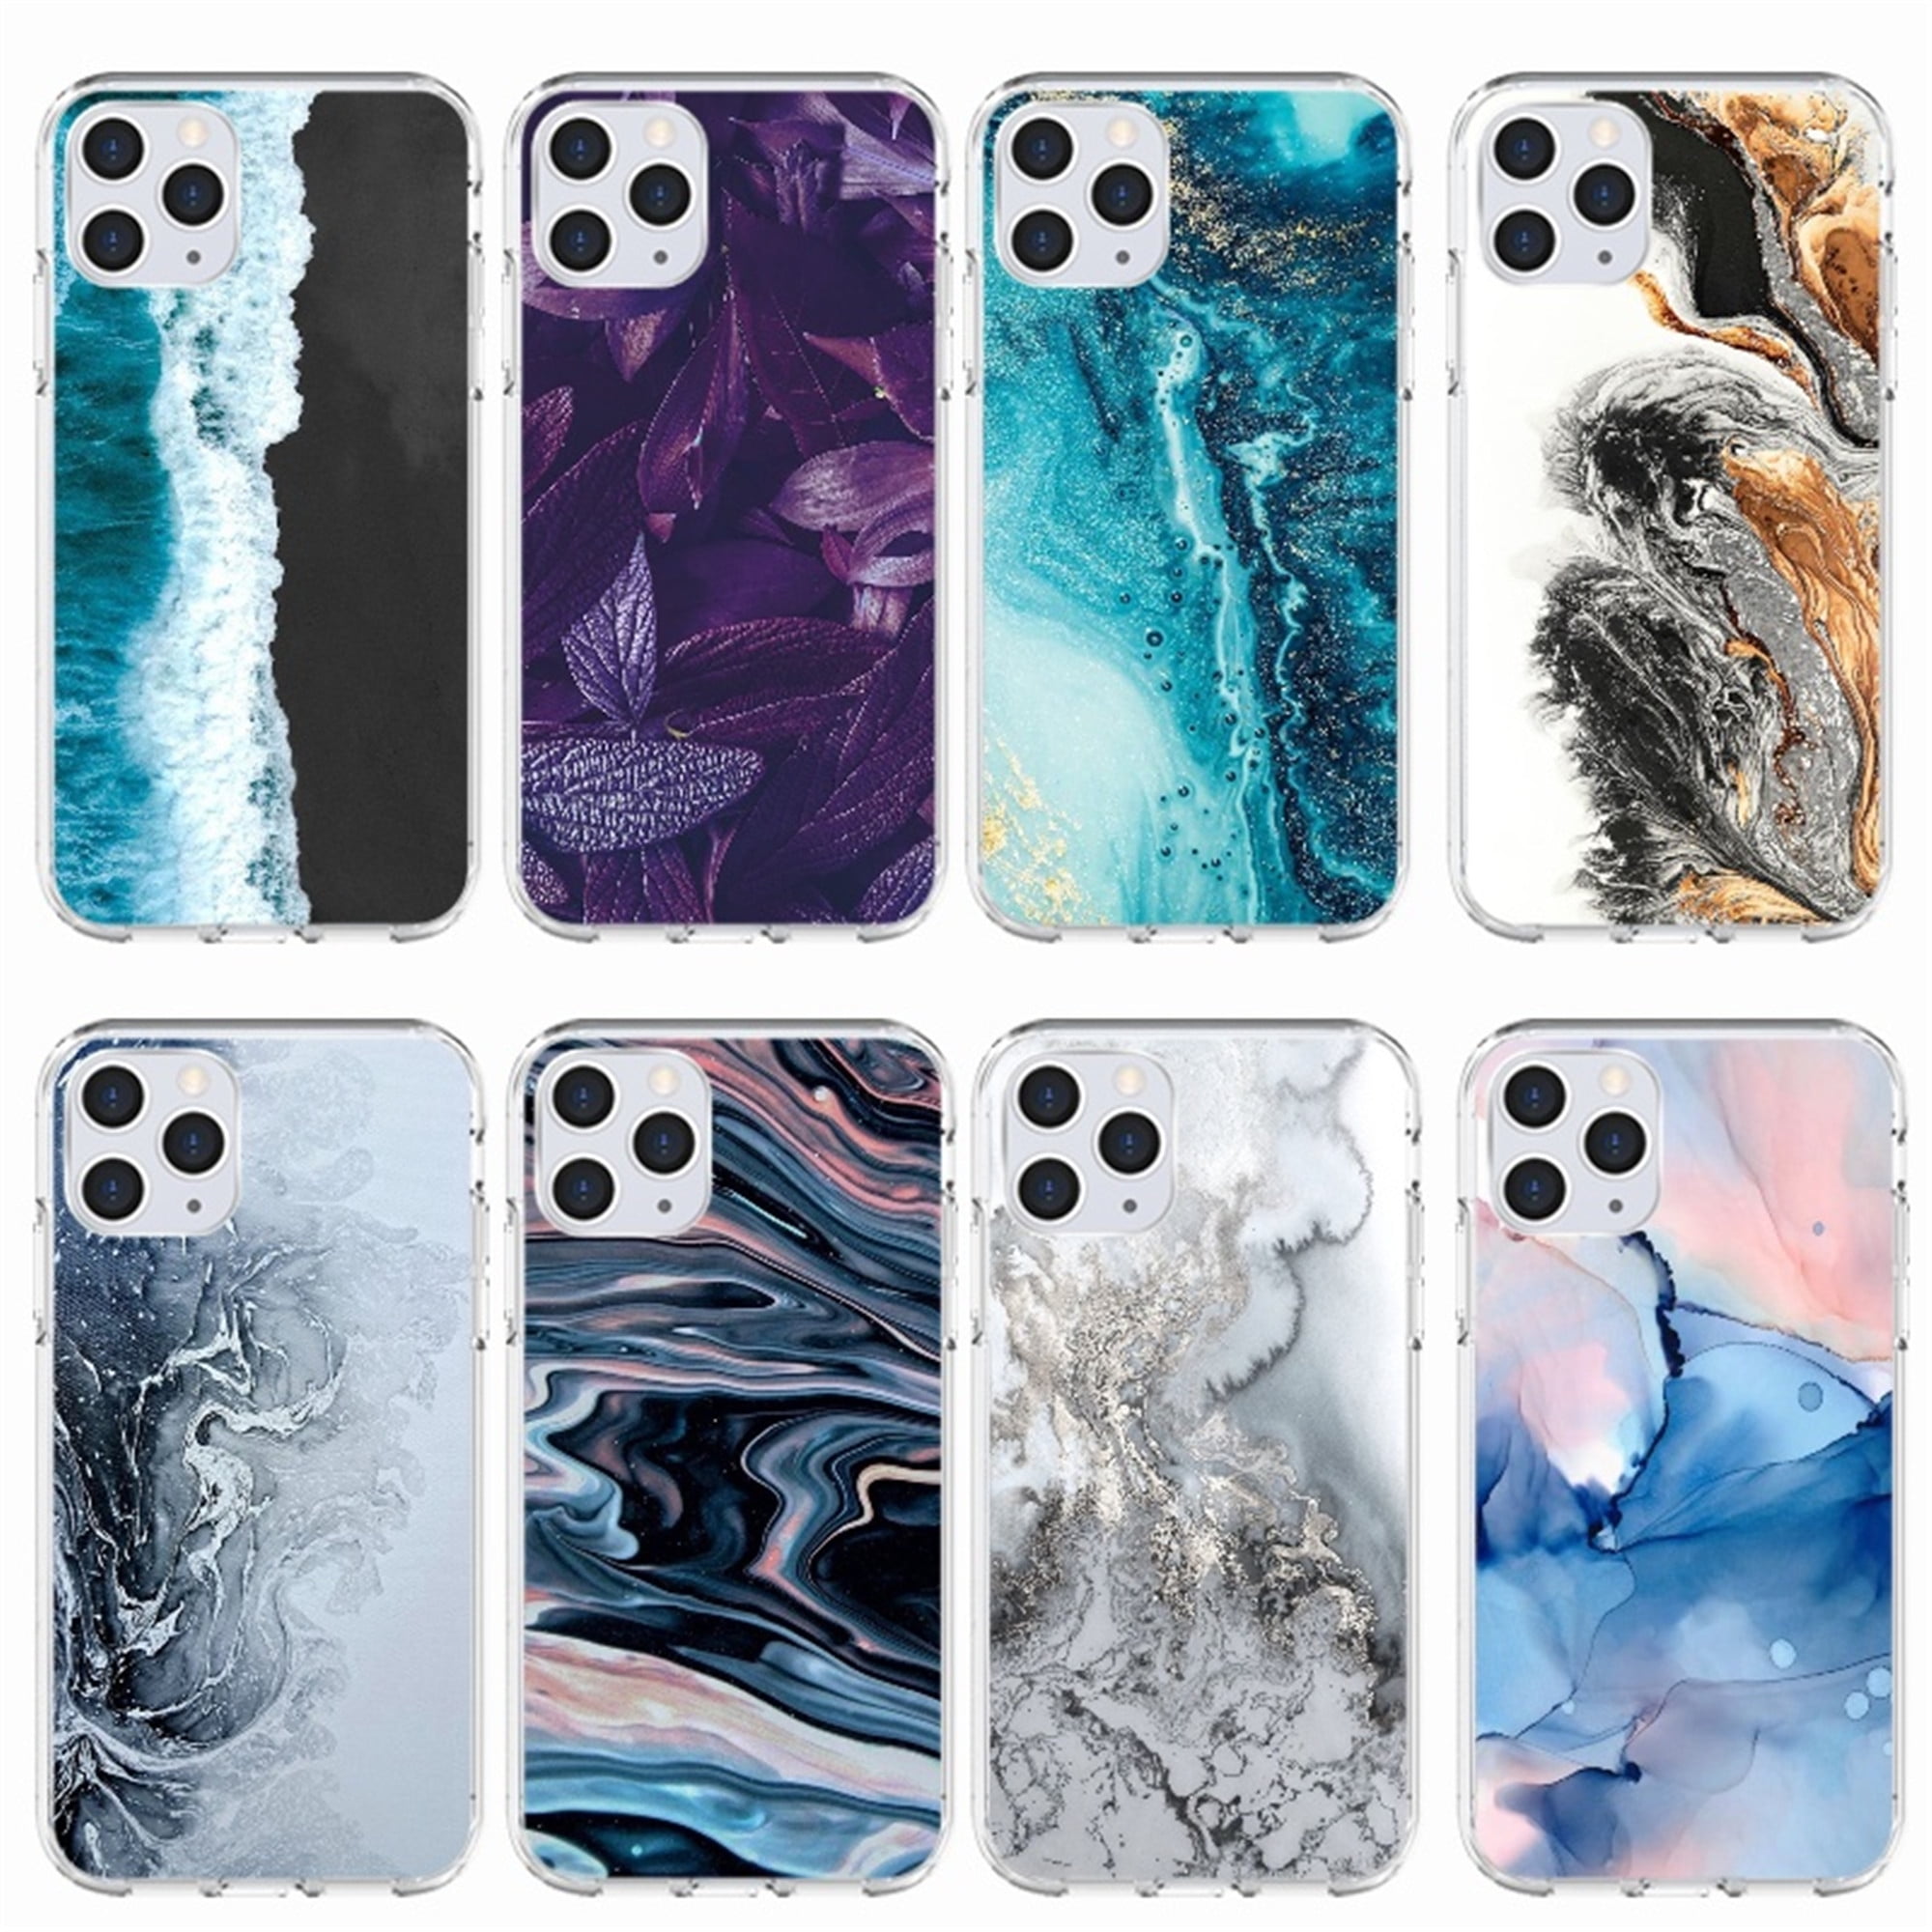 Kaap ergens Niet genoeg for iPhone 6/6s Case,Fashion Marble Phone Cover for iPhone 6/6s -  Walmart.com